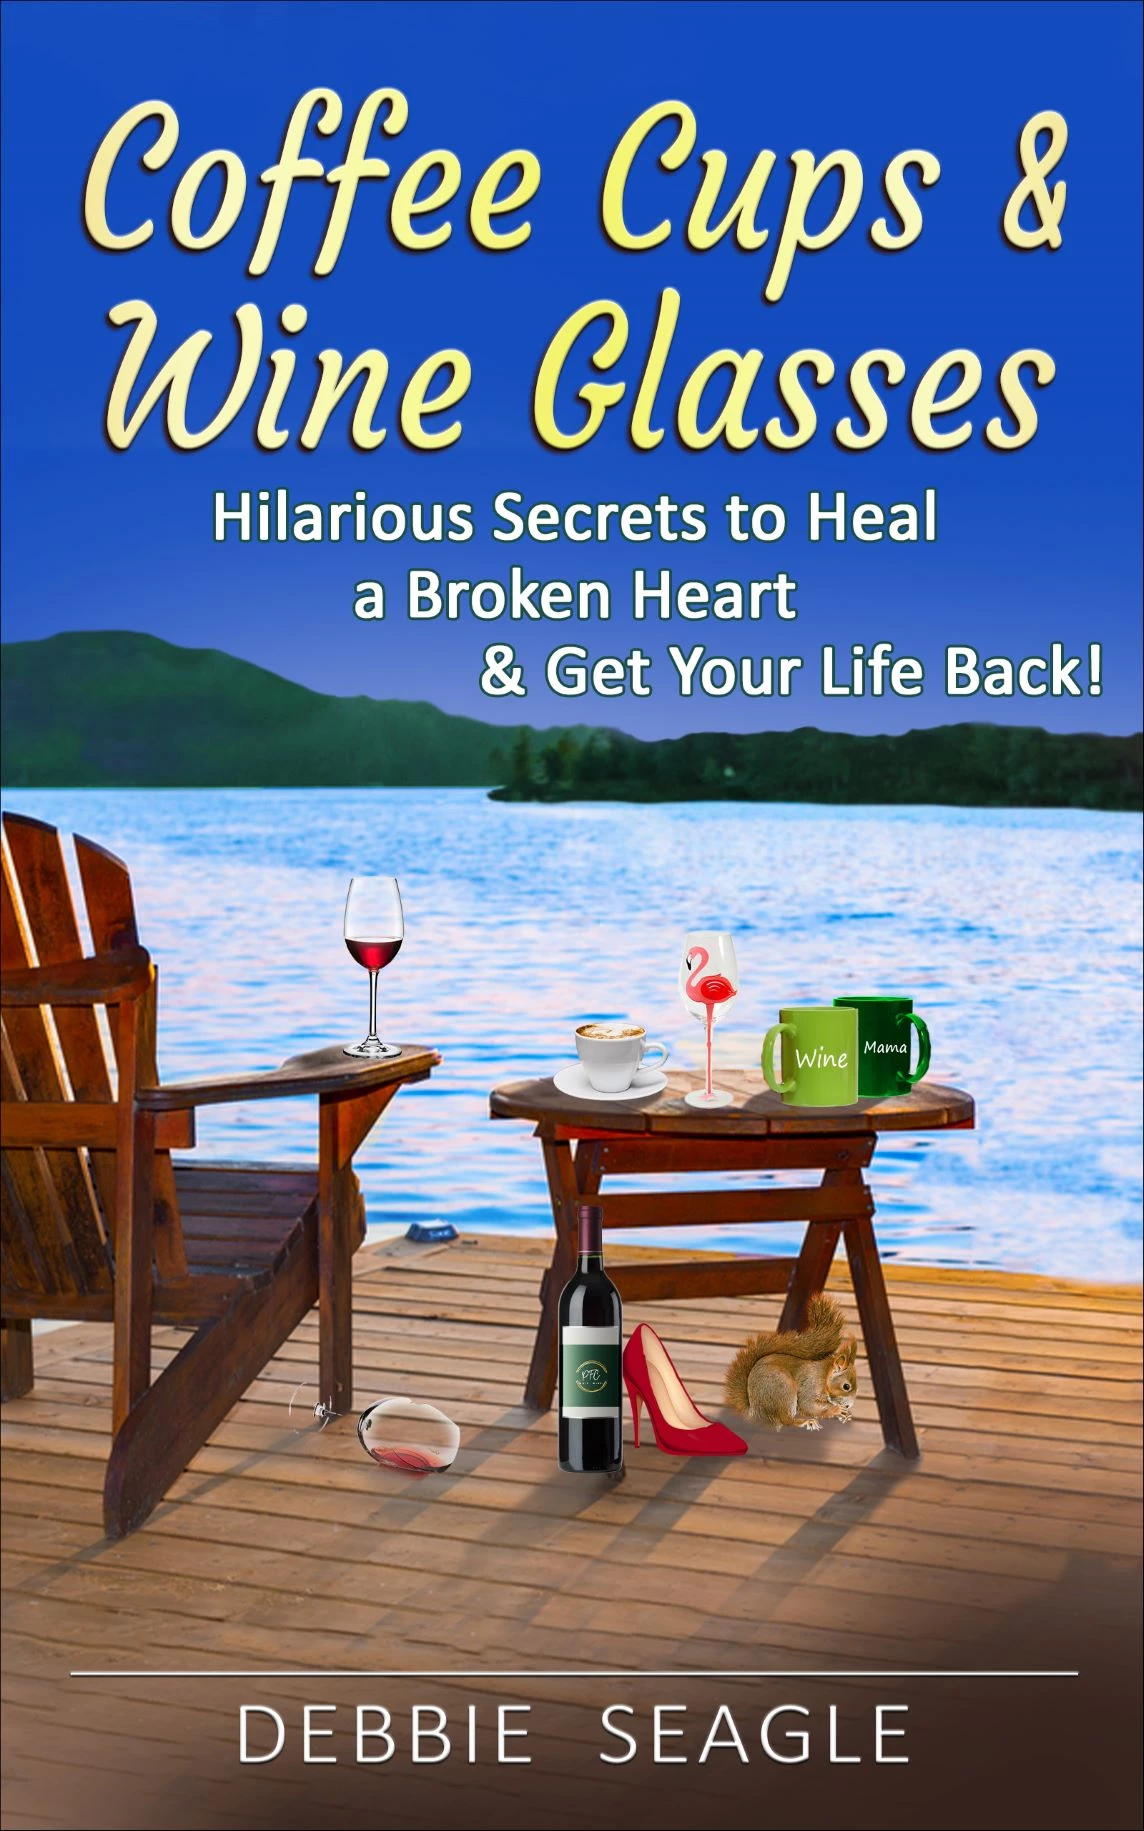 Coffee Cups & Wine Glasses. Hilarious Secrets to Heal a Broken Heart & Get Your Life Back!